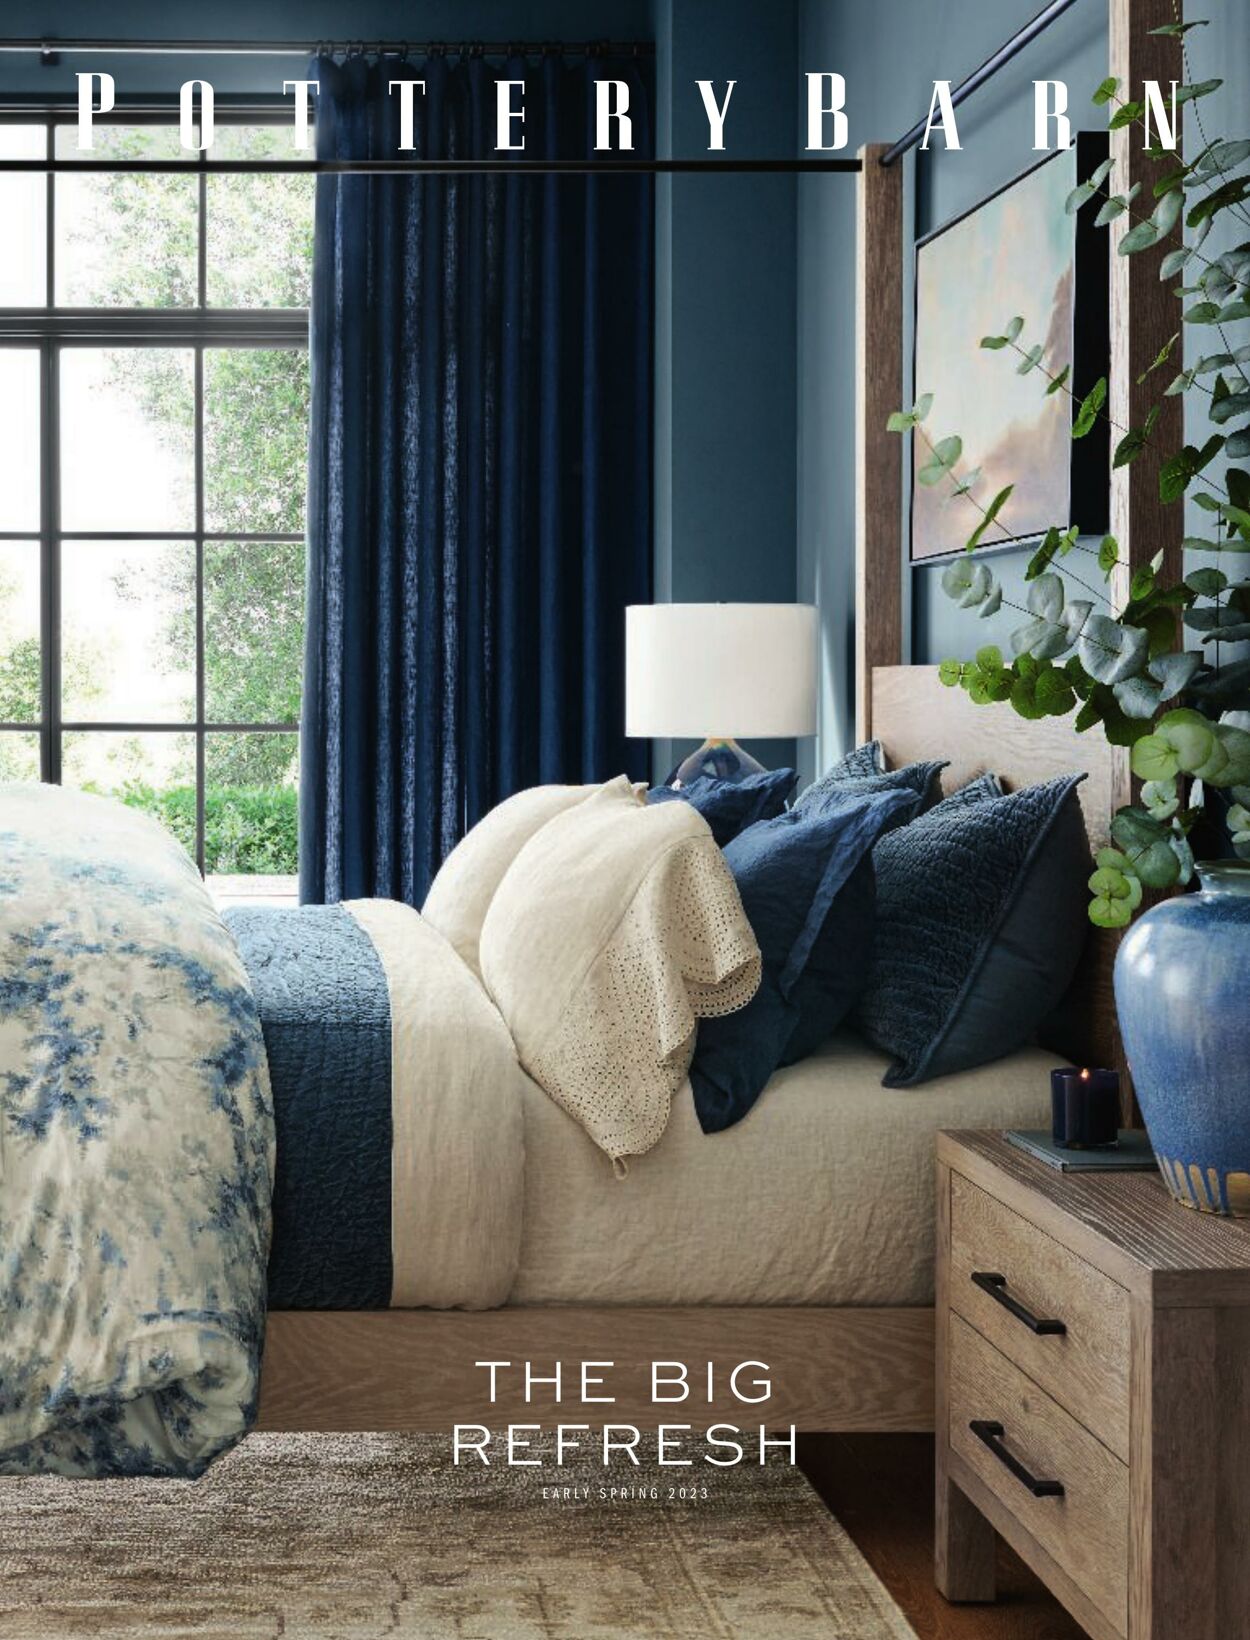 Pottery Barn Promotional weekly ads